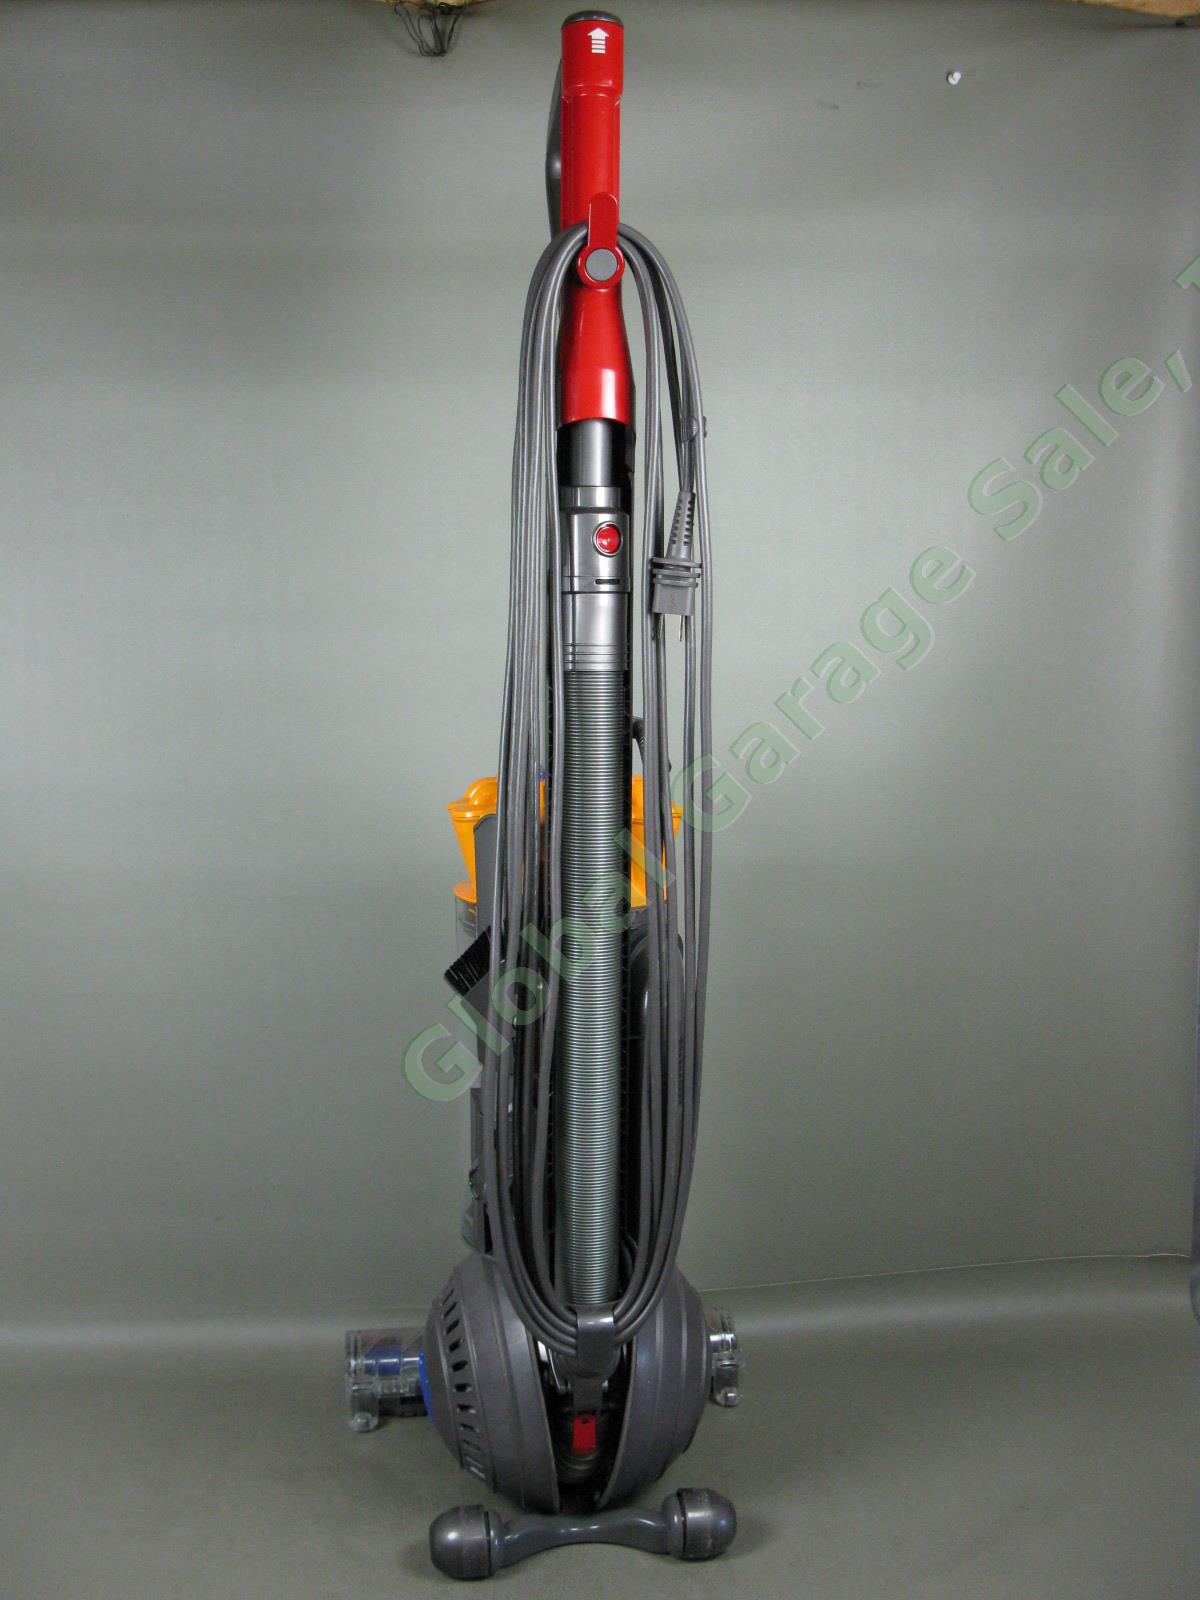 Dyson UP13 Multi Floor Ball Bagless Upright Vacuum Cleaner W/ Manual $400 Retail 4